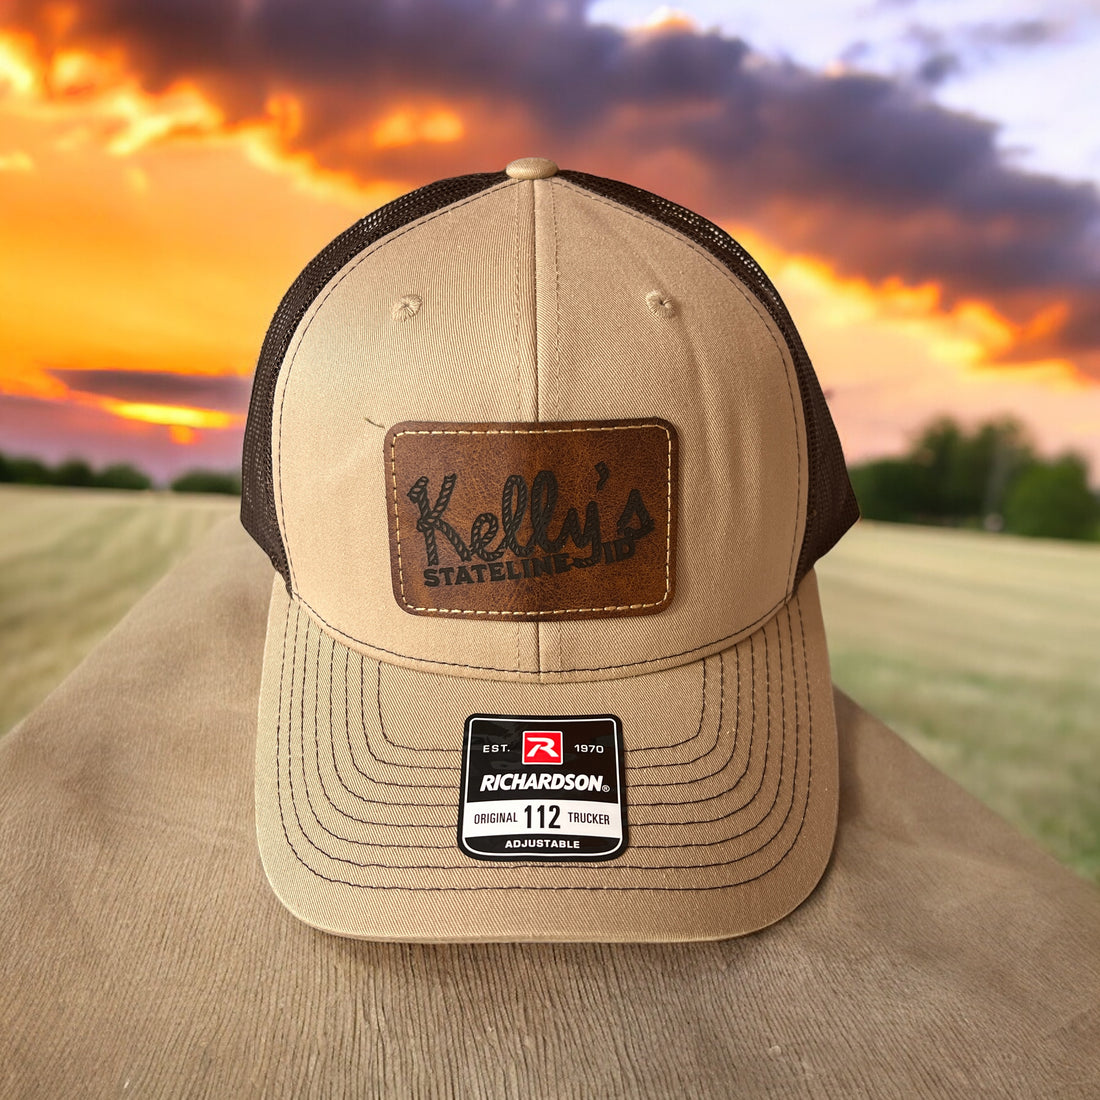 Image of the Kelly Hughes Stateline ID Richardson Cap with a dark brown patch, featuring the band's logo and an integrated ID slot, perfect for showcasing style and convenience at events with durable construction and a comfortable fit.